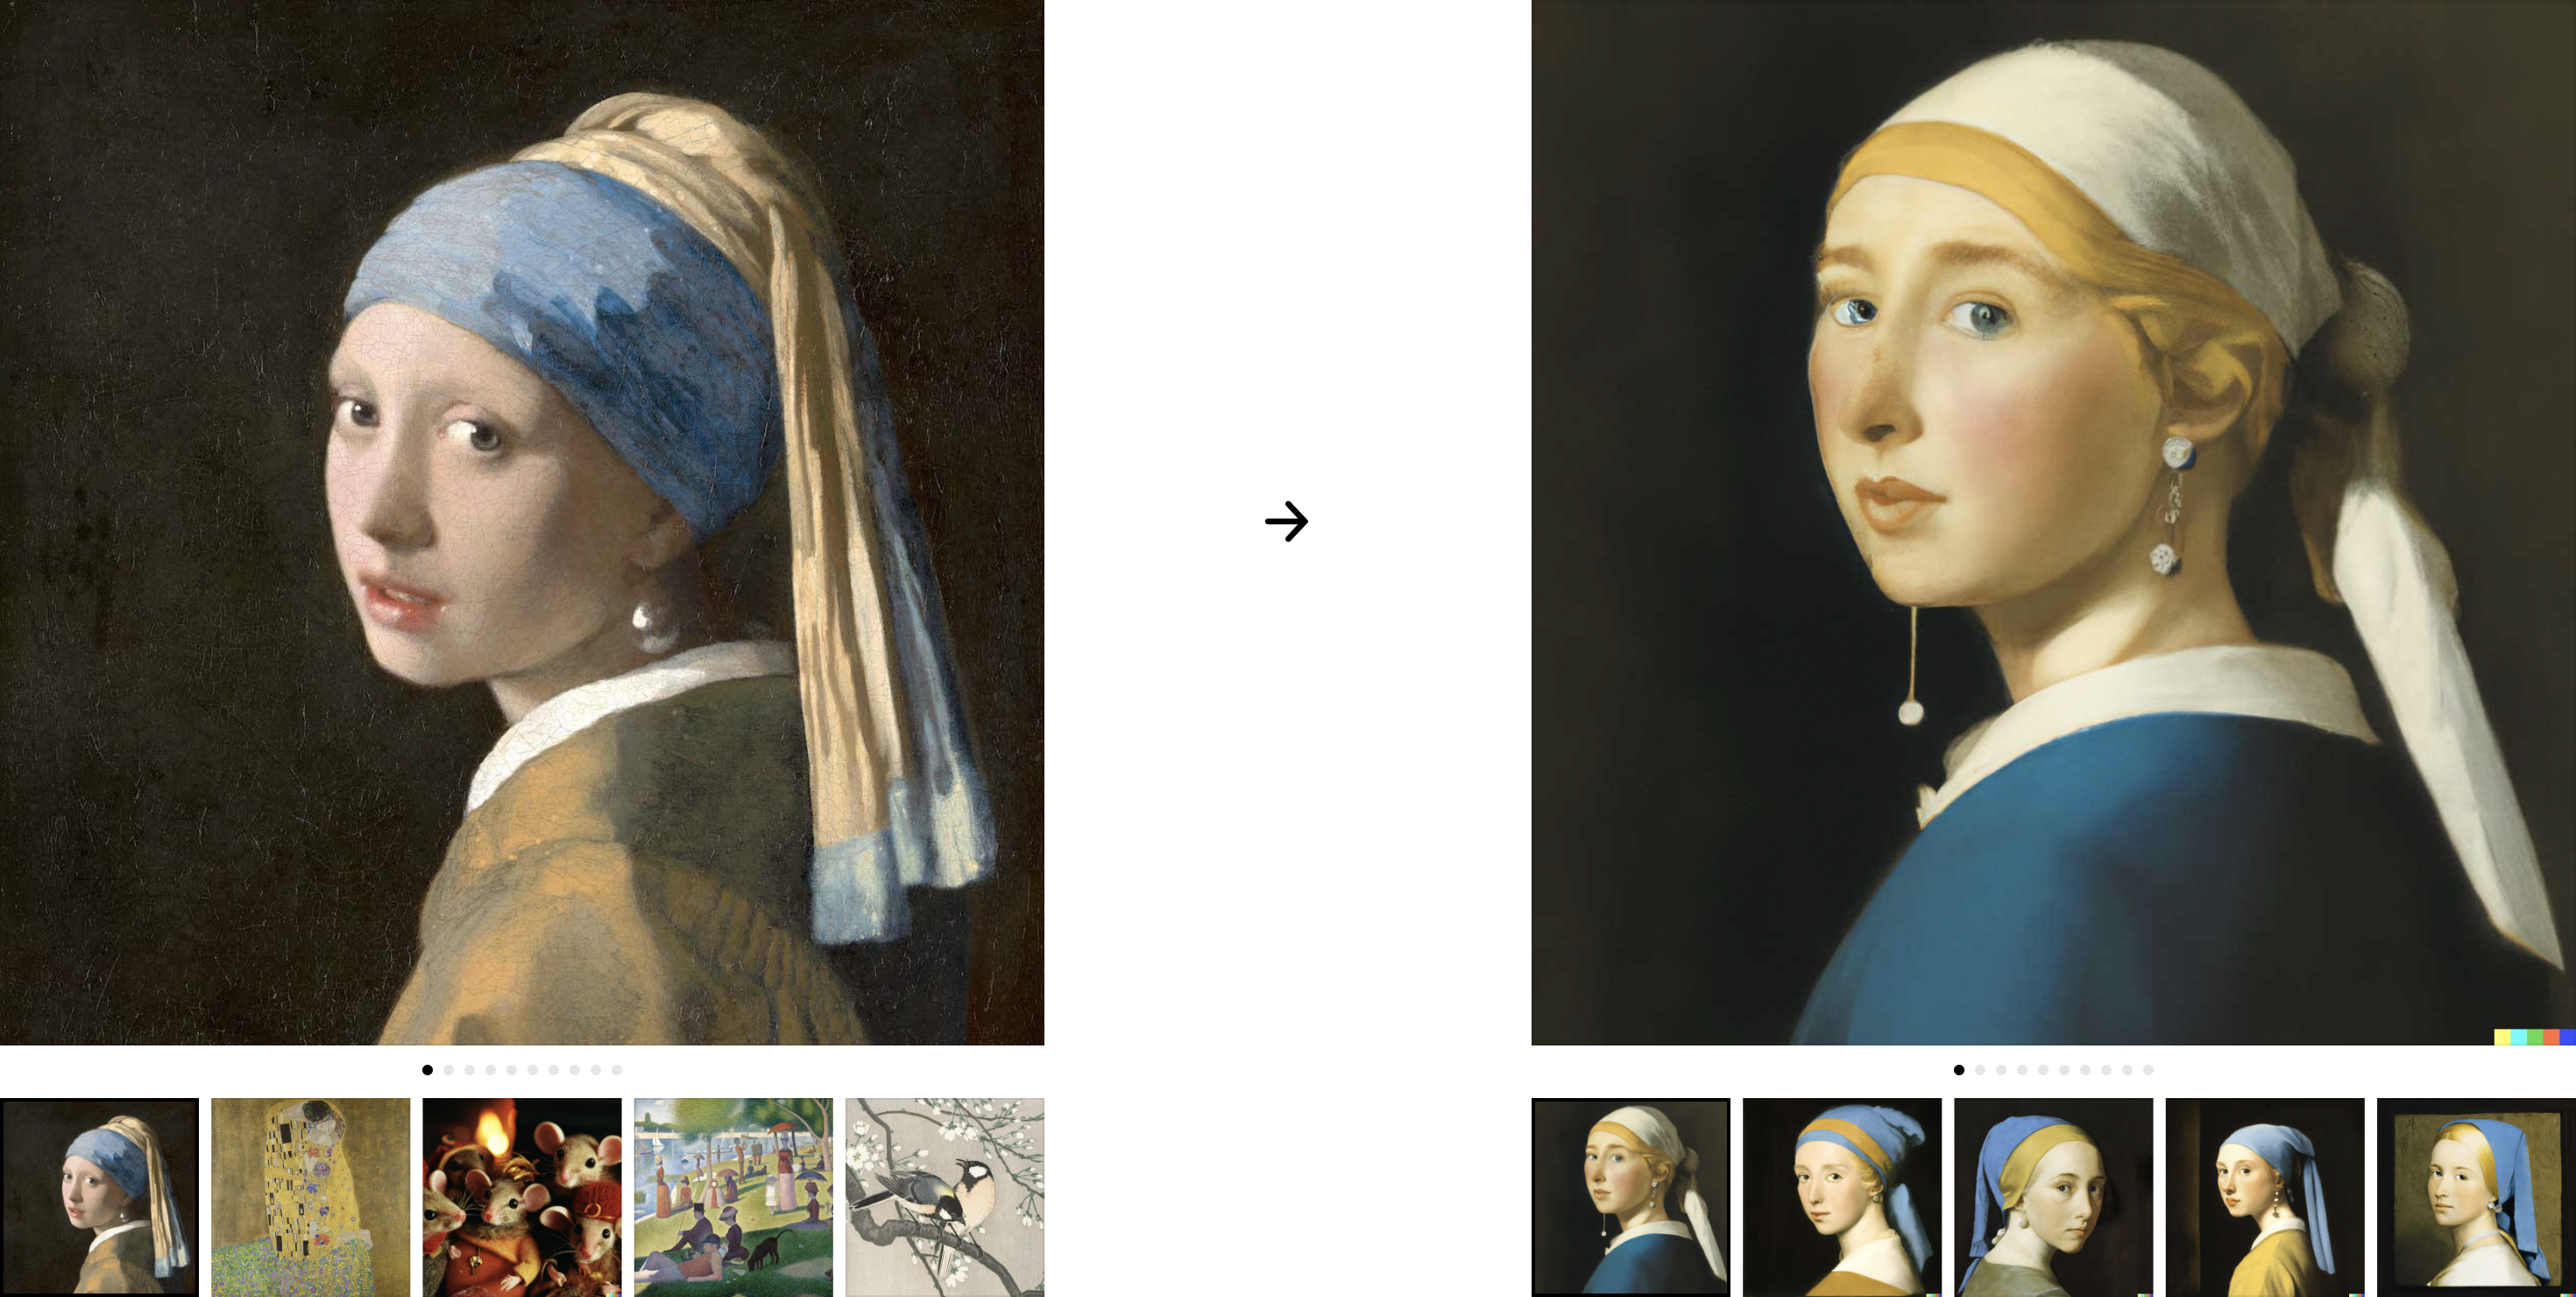 Image created by DALL-E 2 showing variations of 'The Girl with the Pearl Earring' painting